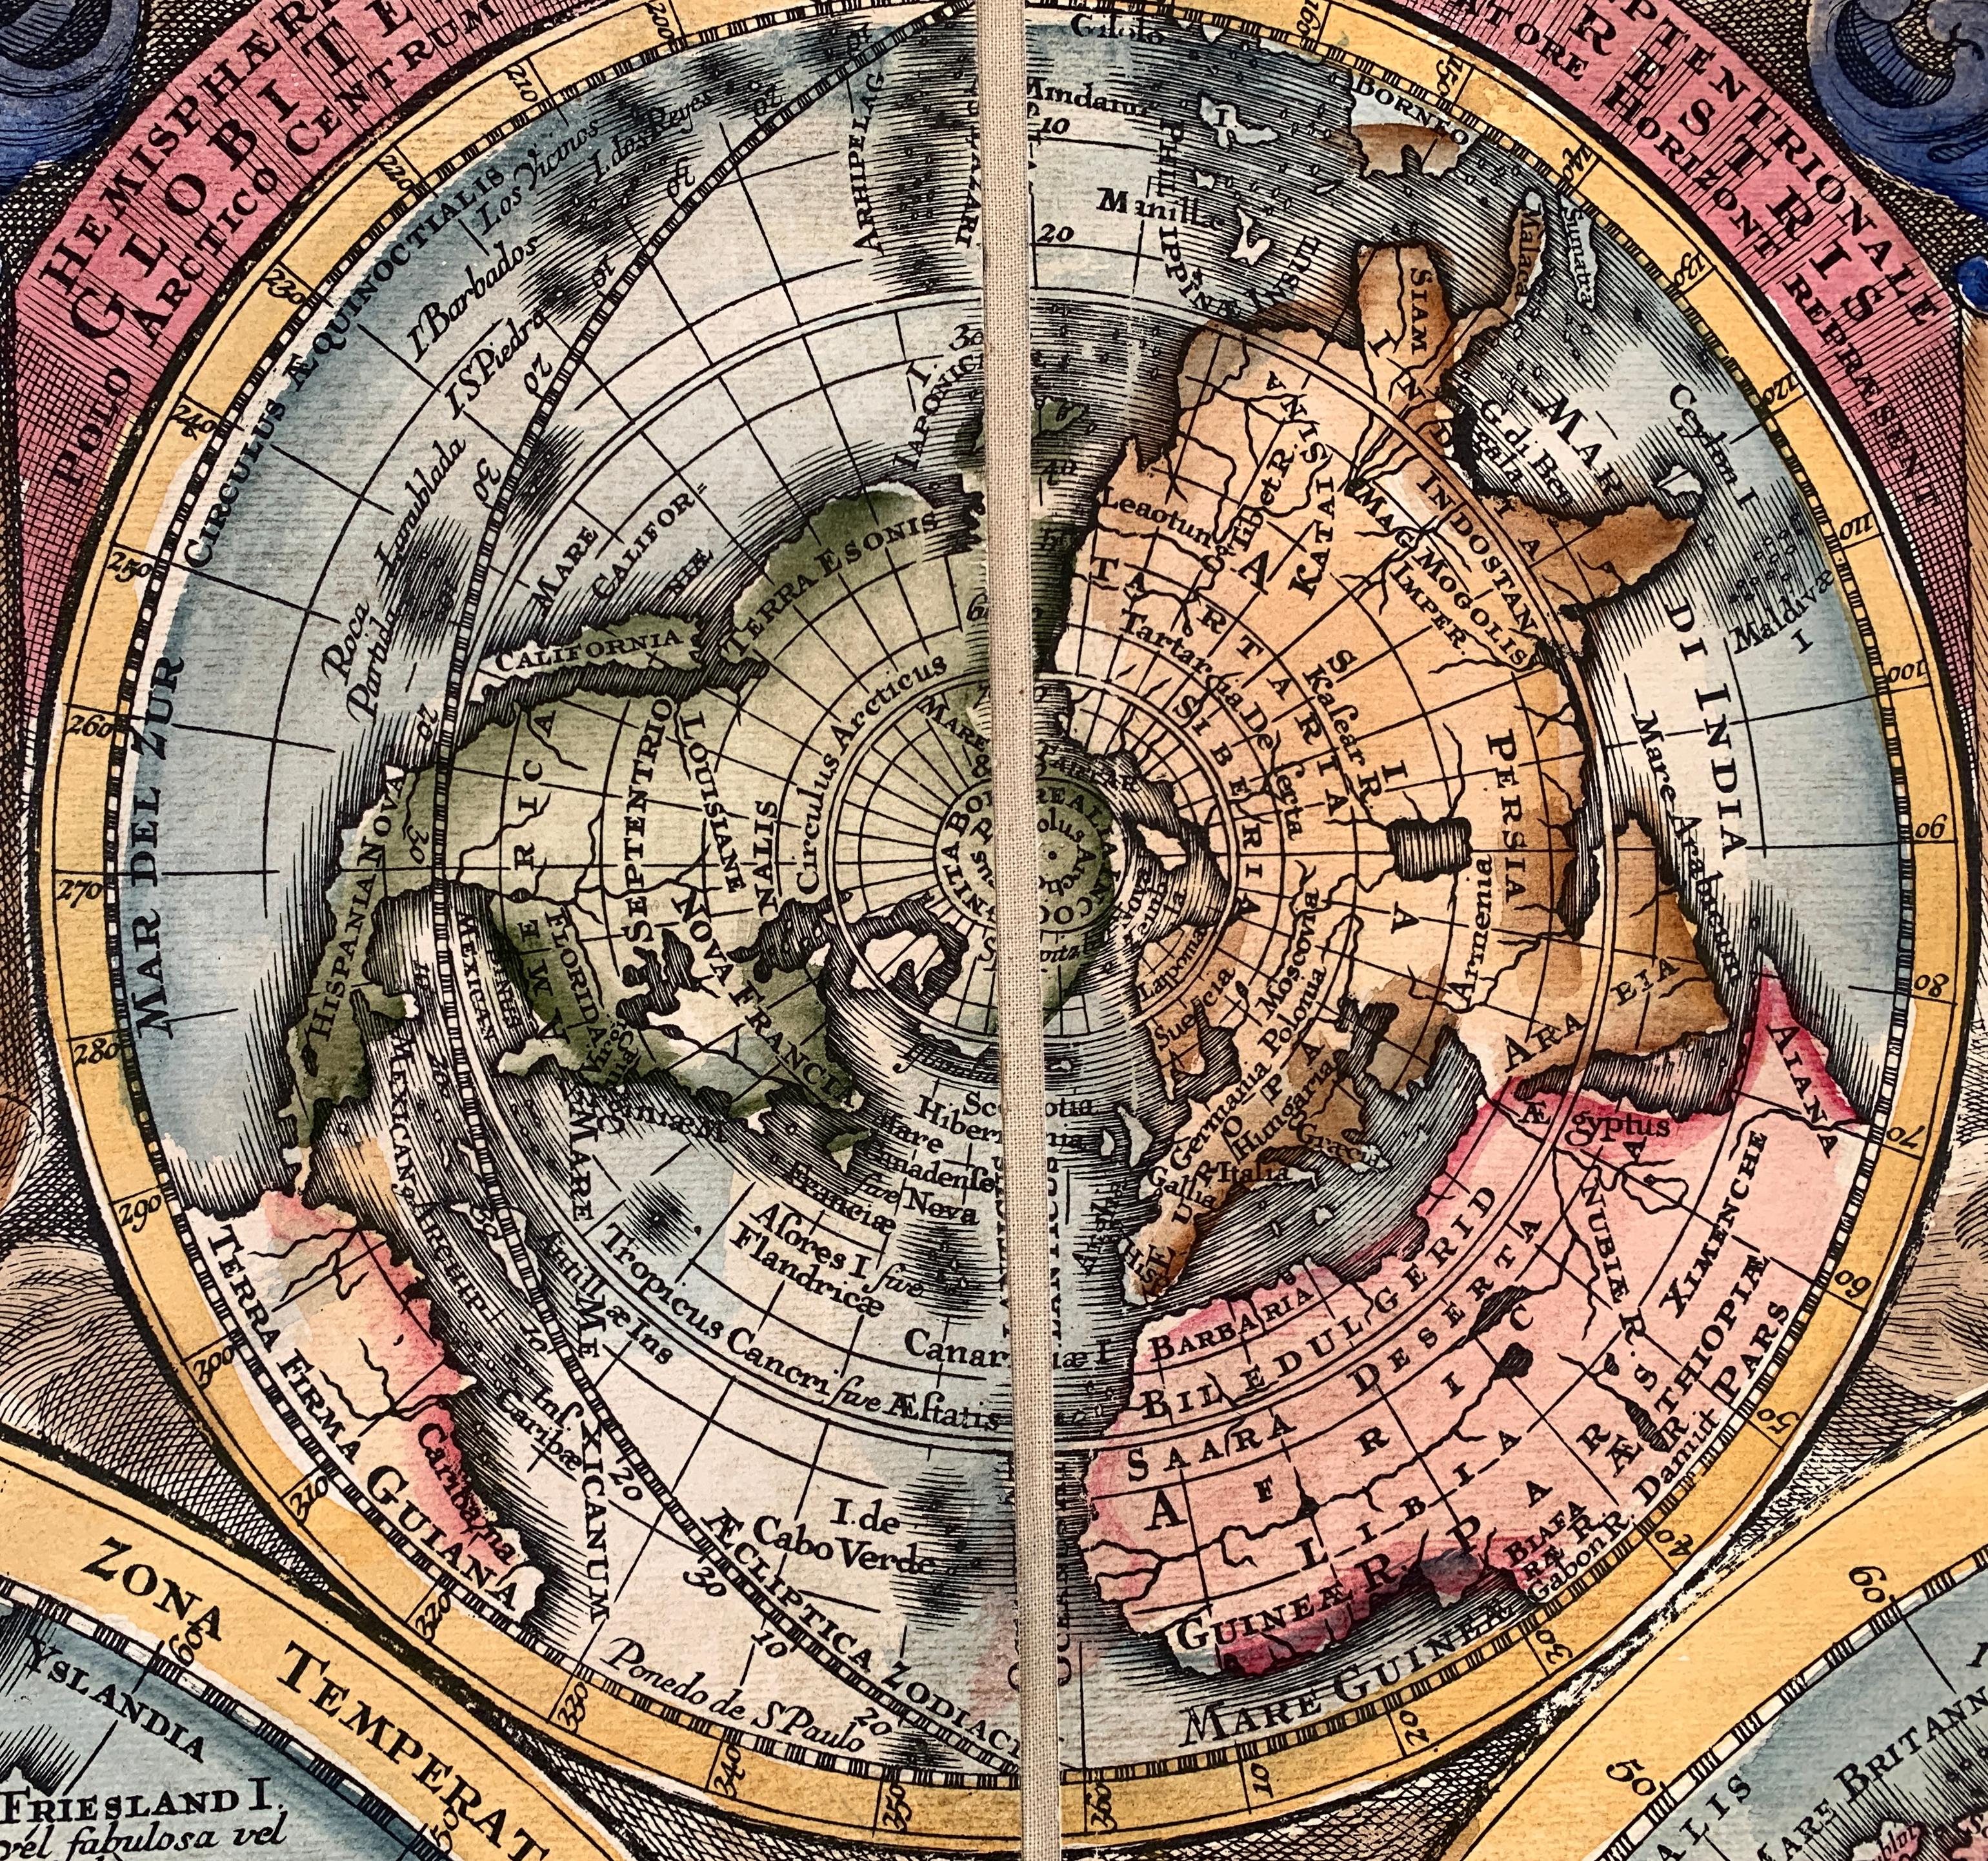 C. 1995 oversize, decorative, hand-colored re-strike engraving of an 18th-century world map by Georg Matthaus Seutter (1678-1757). This map has 14 hemispheric projections of all the continents and regions, blow heads, indicating climate zones, and